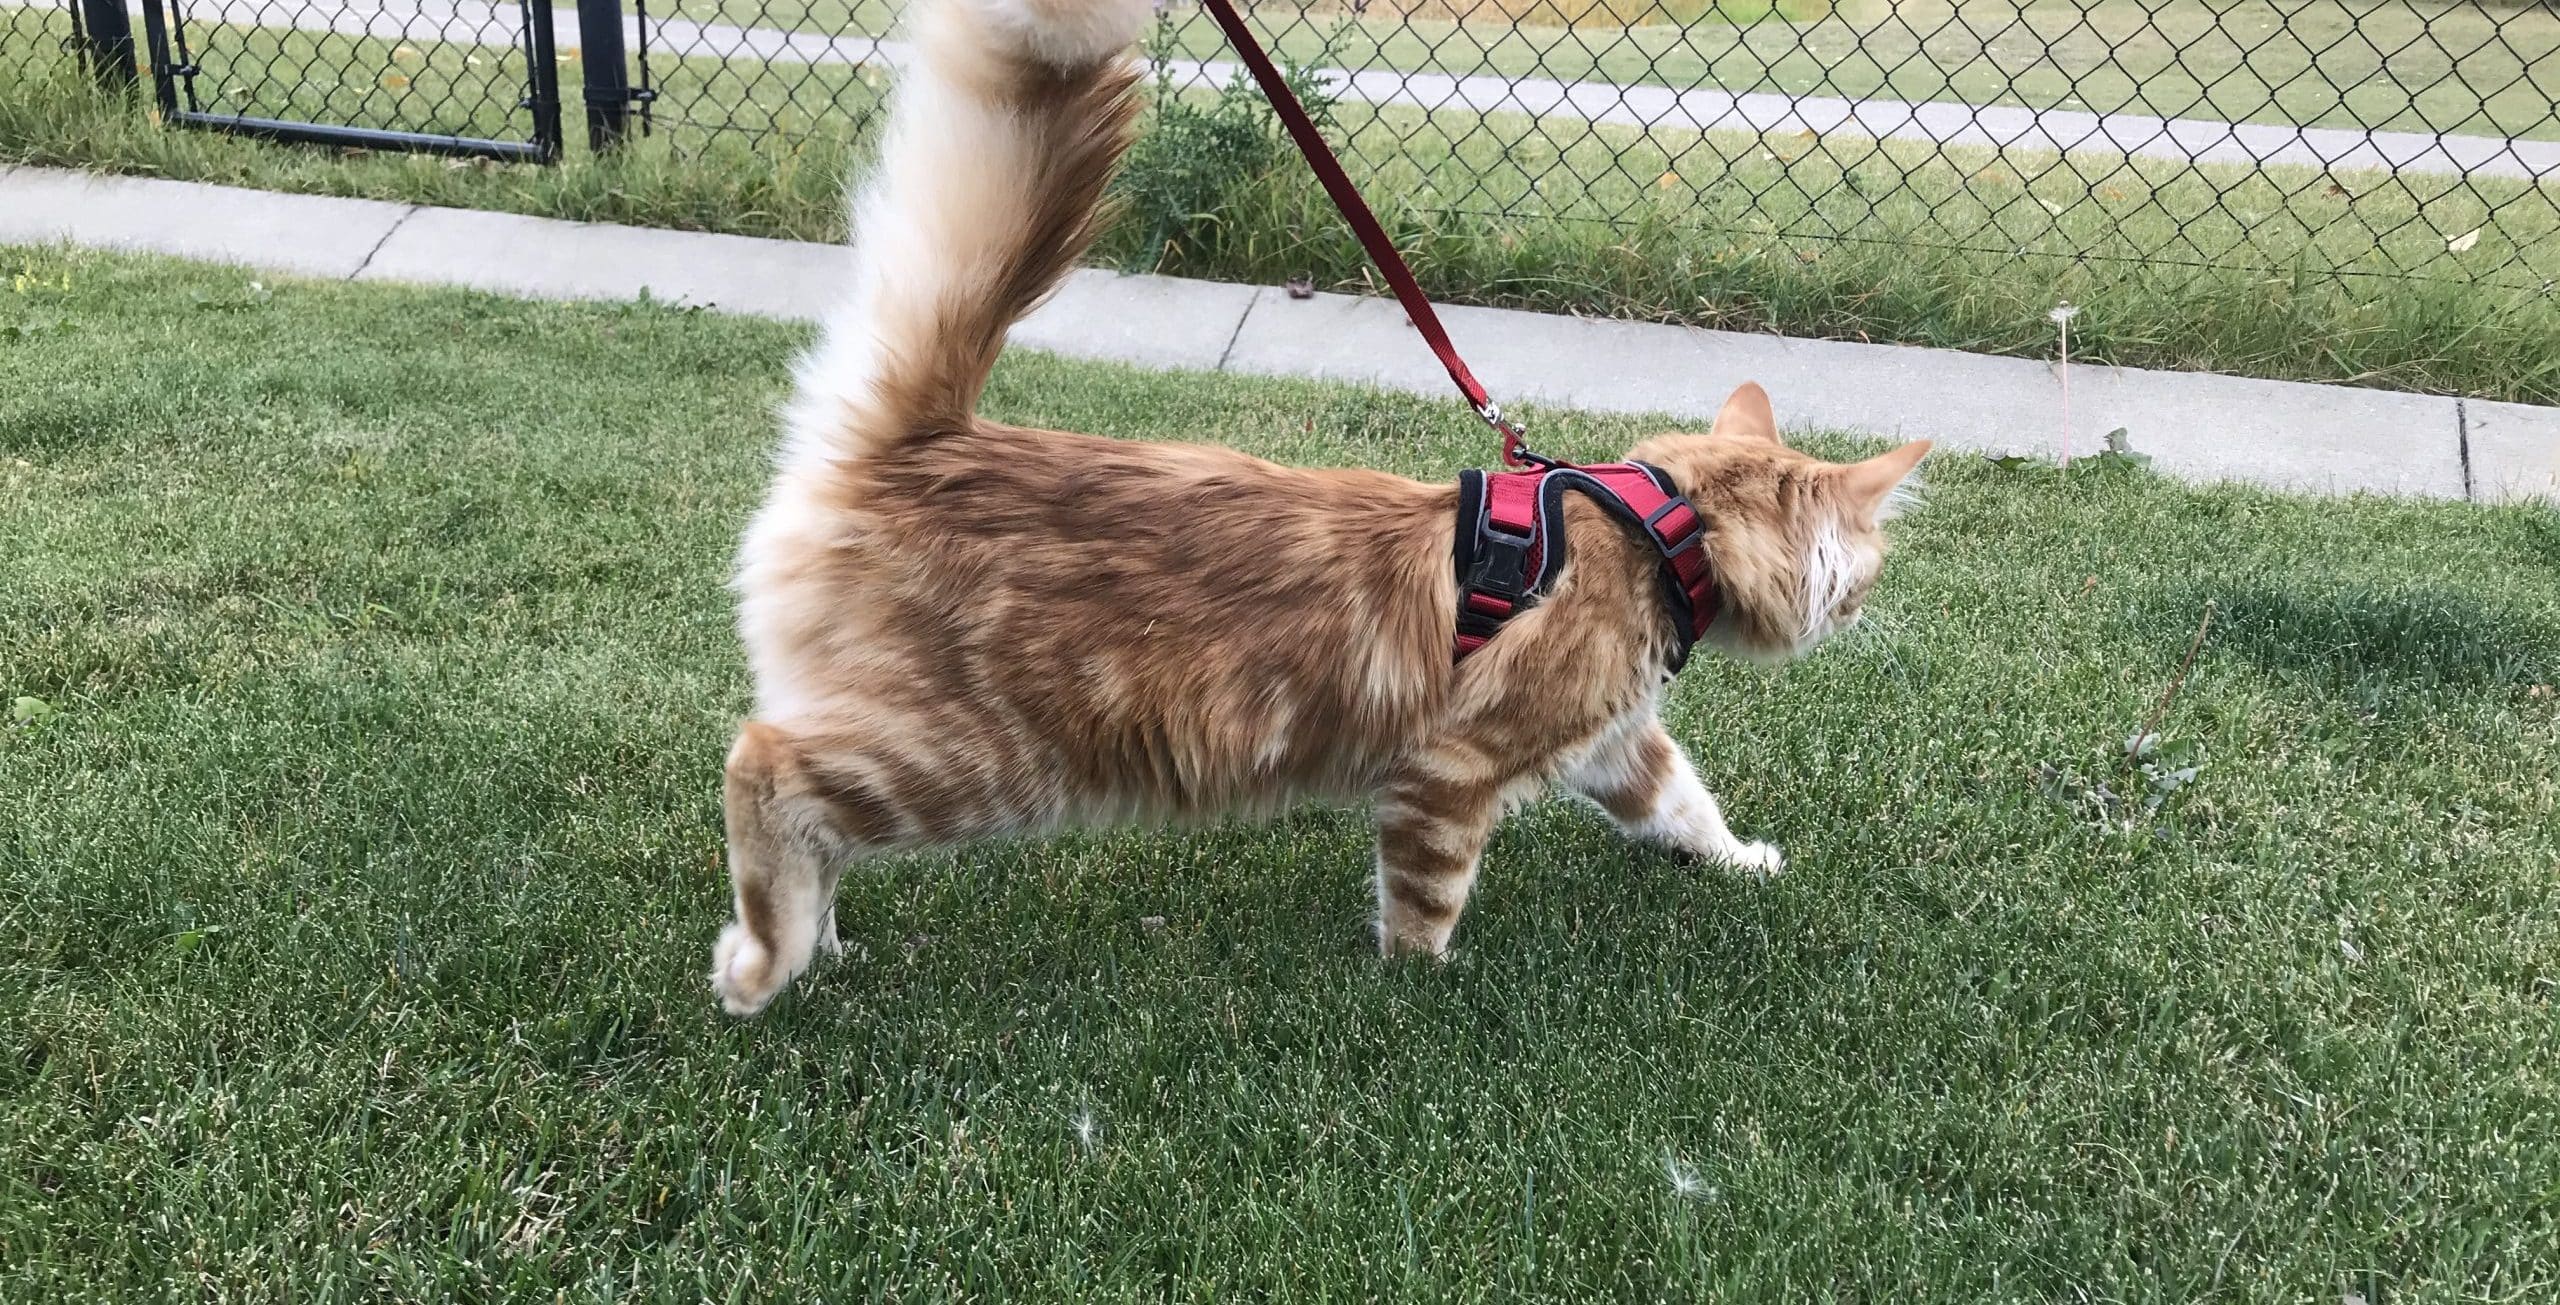 How To Leash Train A Kitten for Outdoor Walks